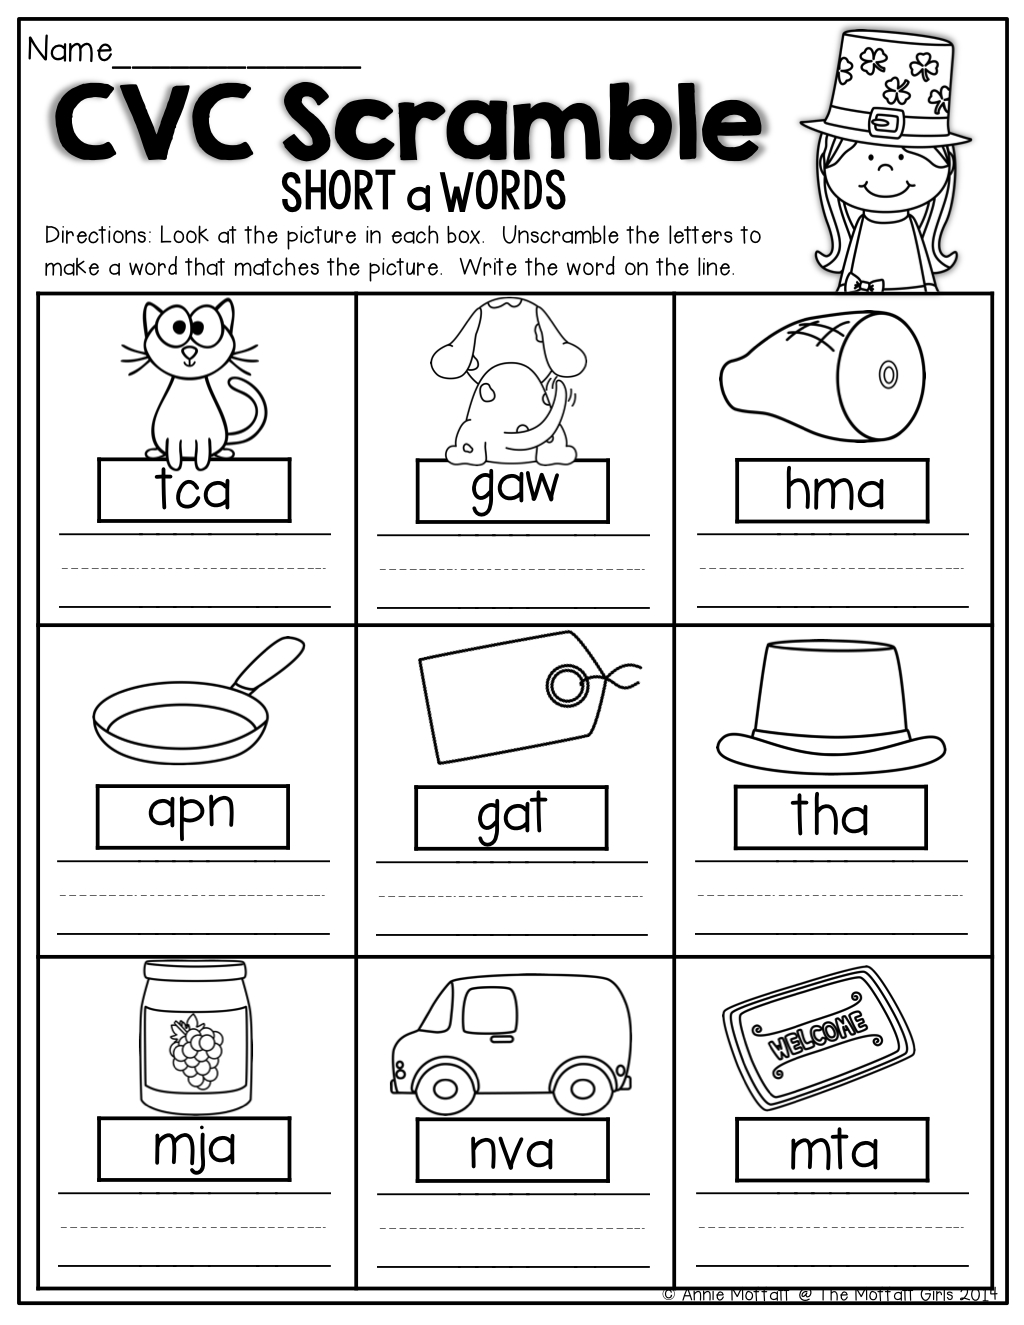 Cvc Scramble! Look At The Picture And Unscramble The Letters To Make - Free Printable Cvc Worksheets